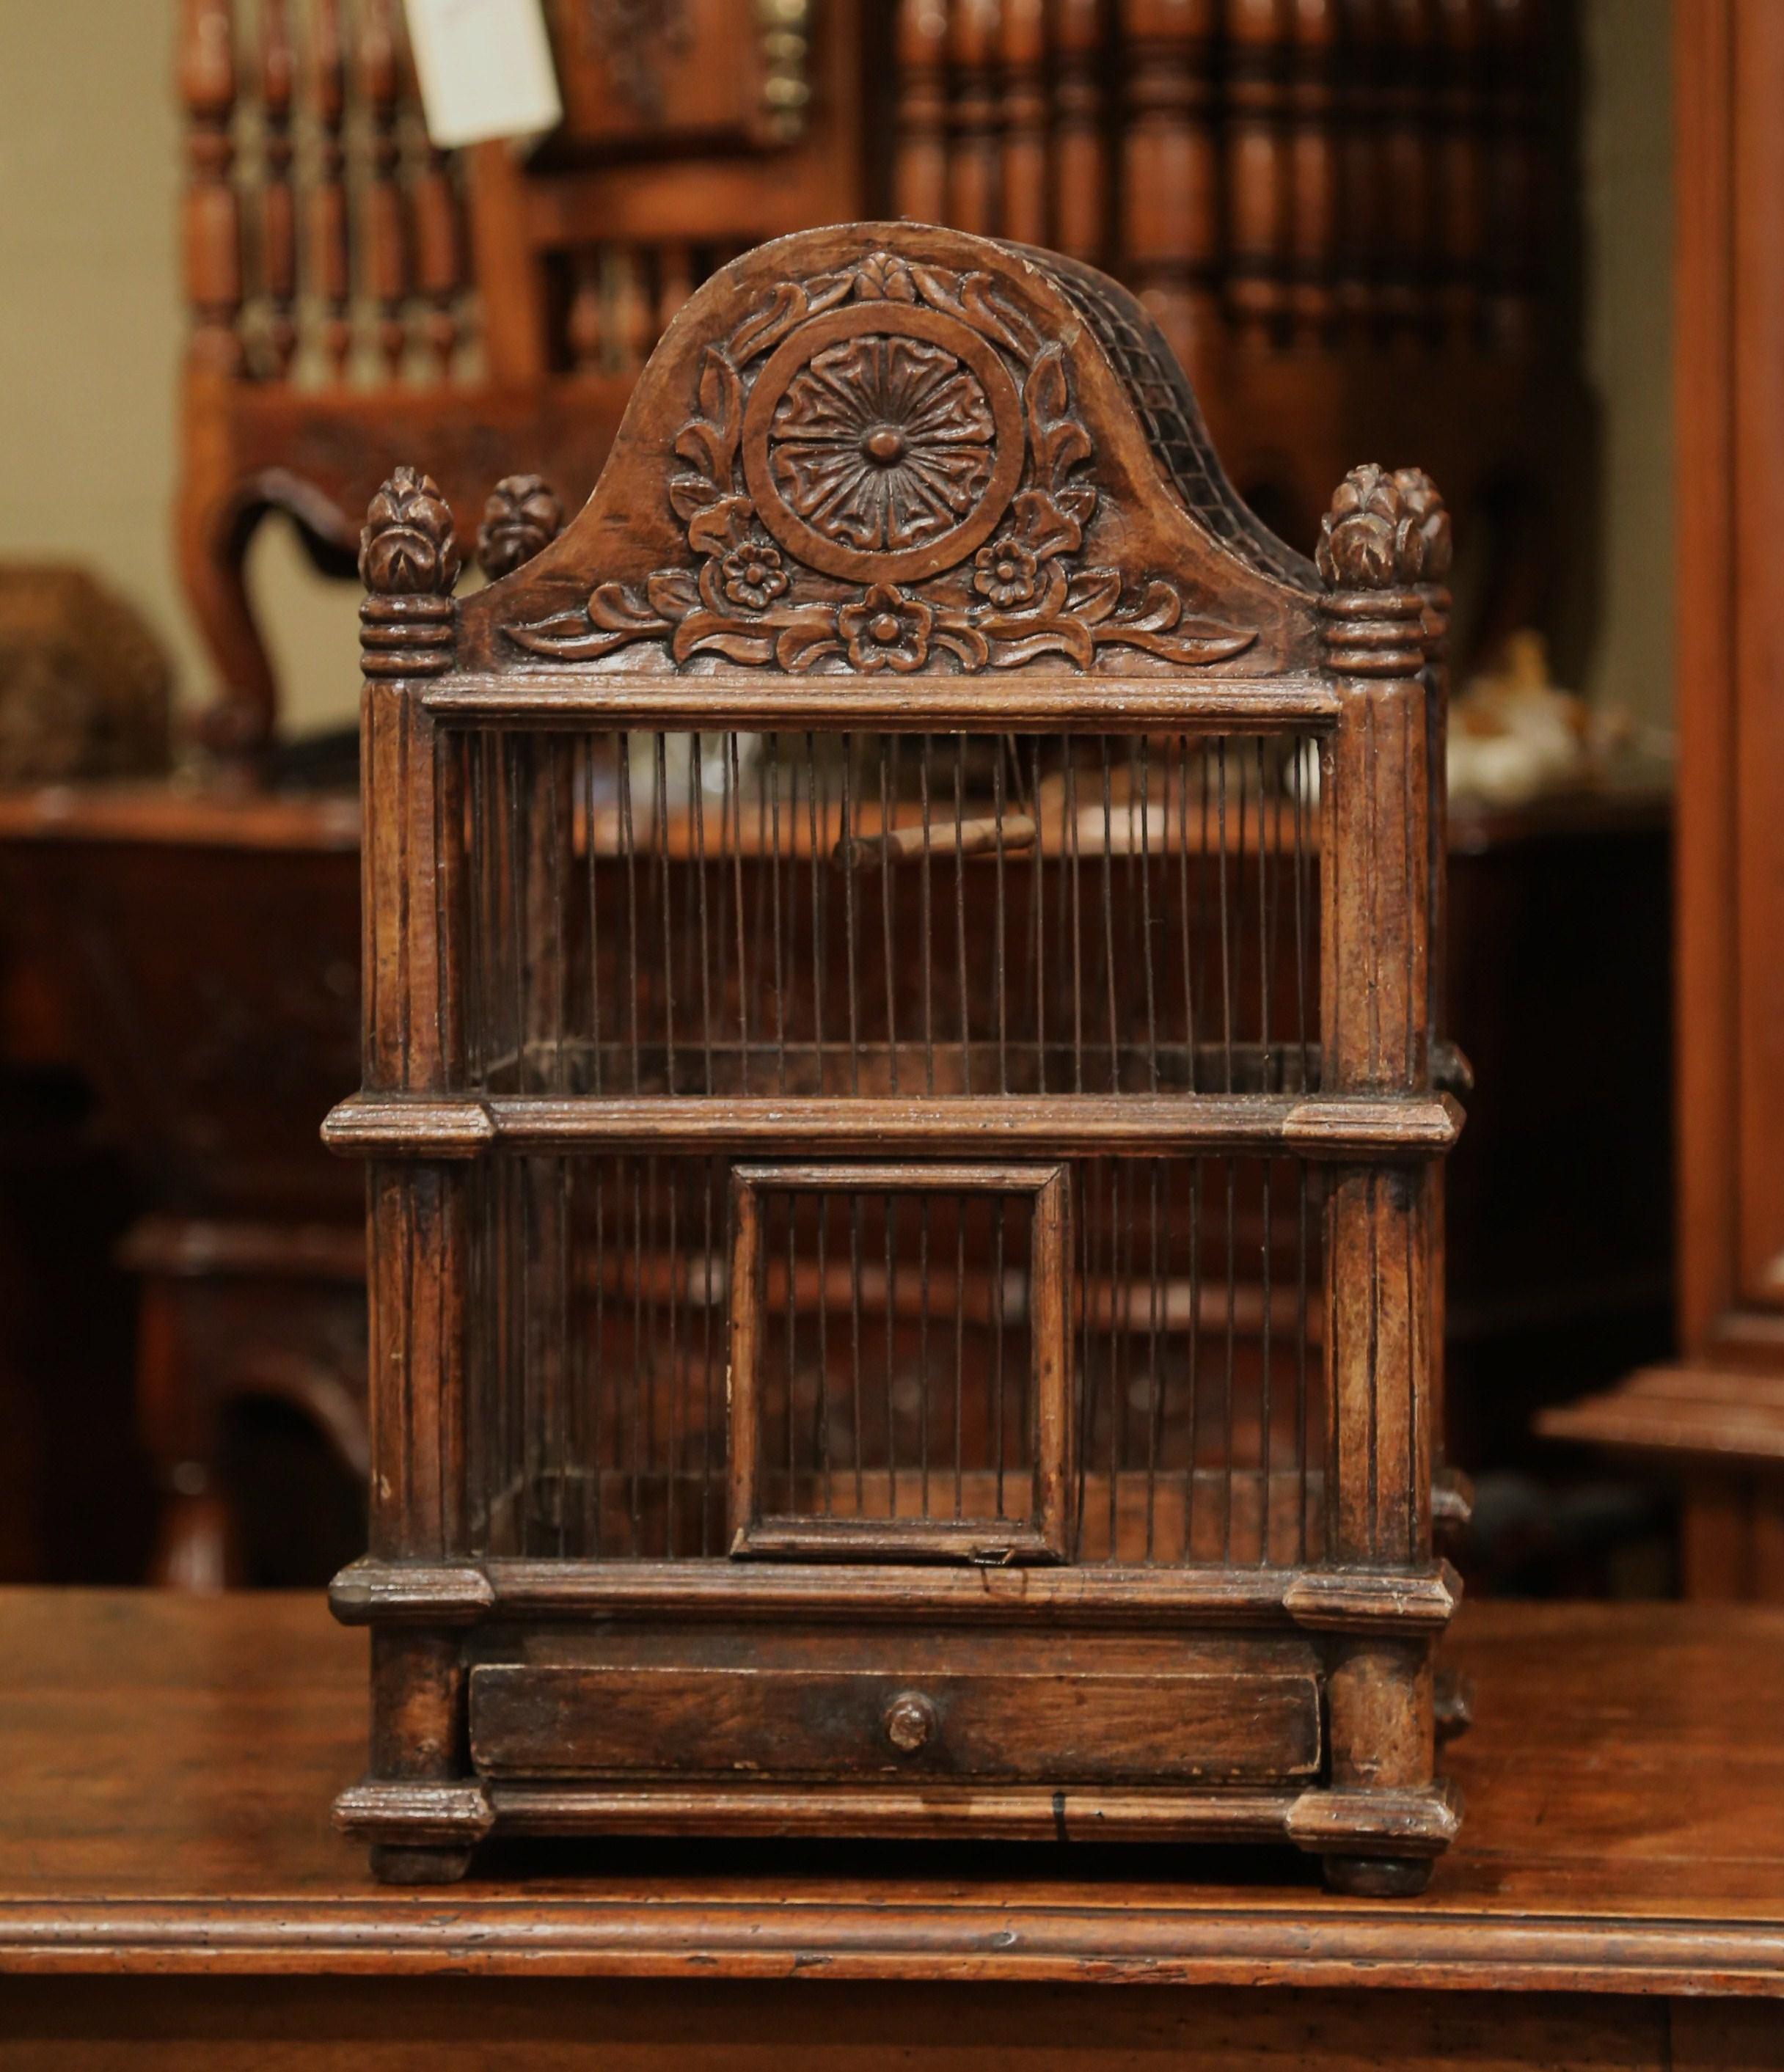 Bring the outdoors in with this large, elegant birdcage. Crafted in France, circa 2010, the carved walnut cage is decorated with a central carved medallion, and an arched dome top embellished with decorative finials in the corners. The cage is